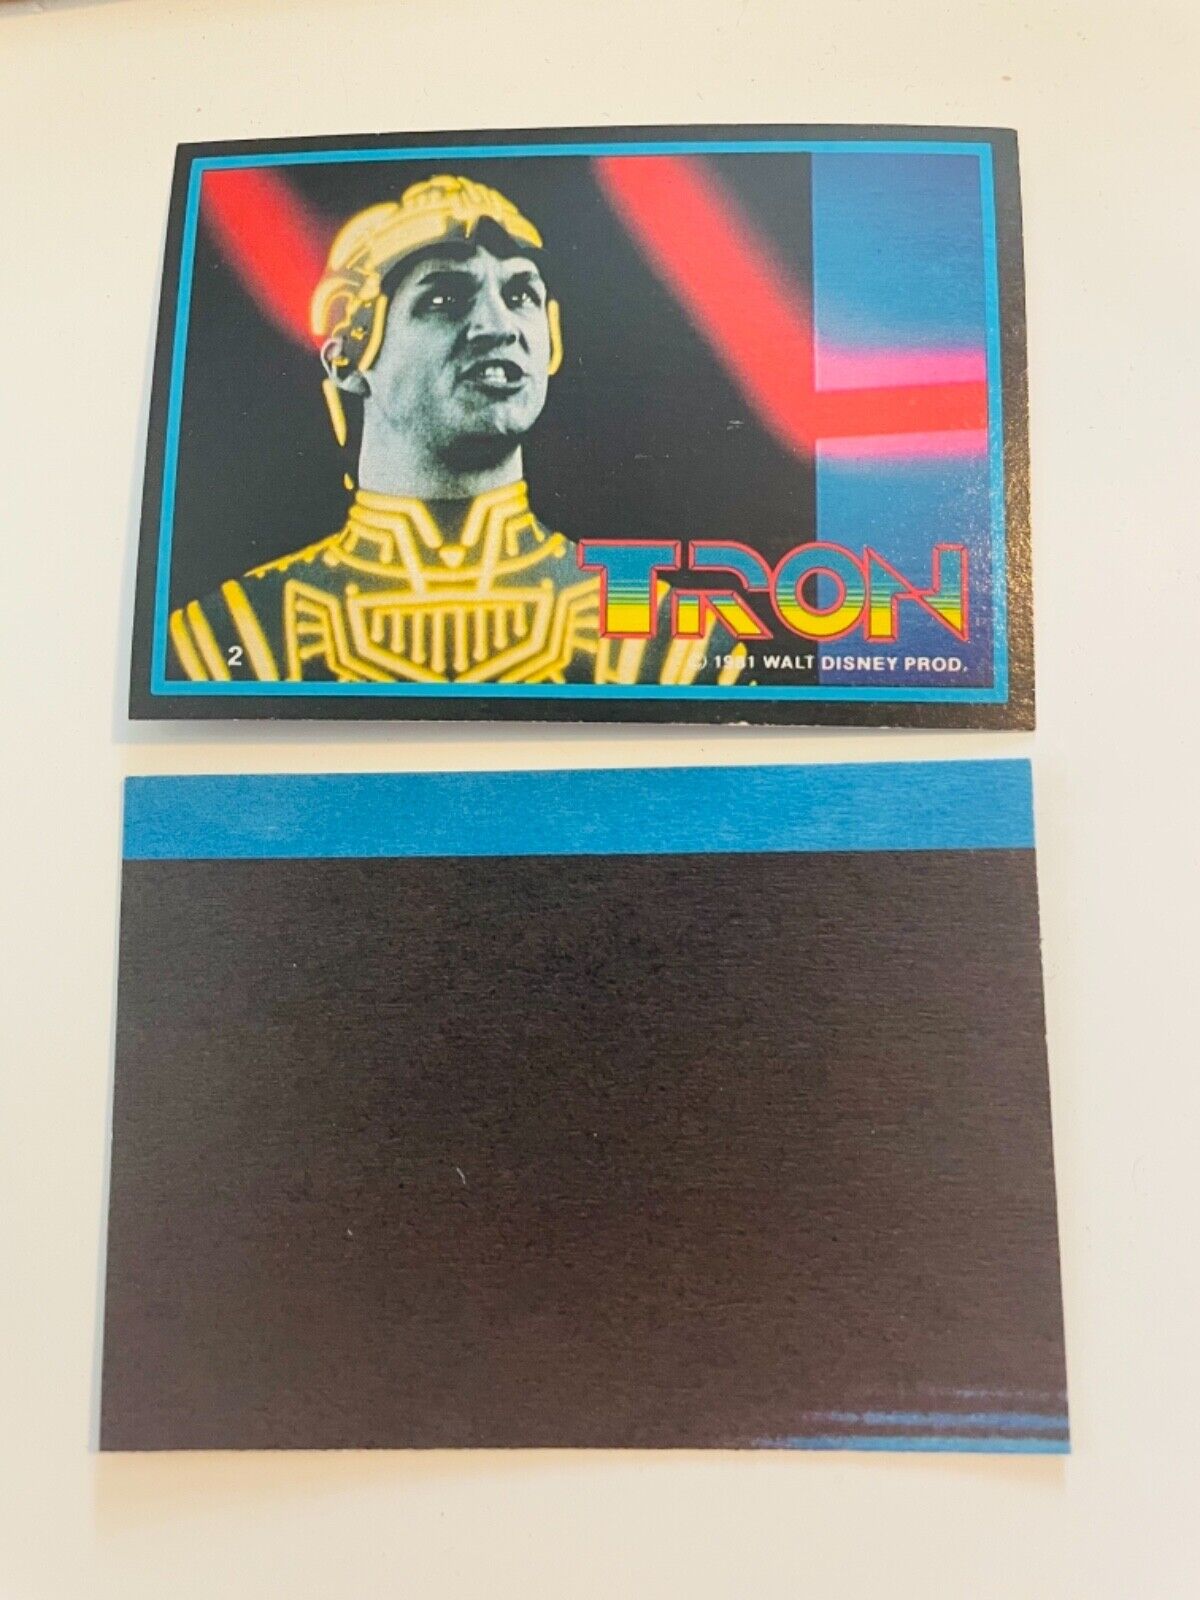 Tron Puzzle Trading Collection Cards A WALT DISNEY MOVIE 1981 Vintage 